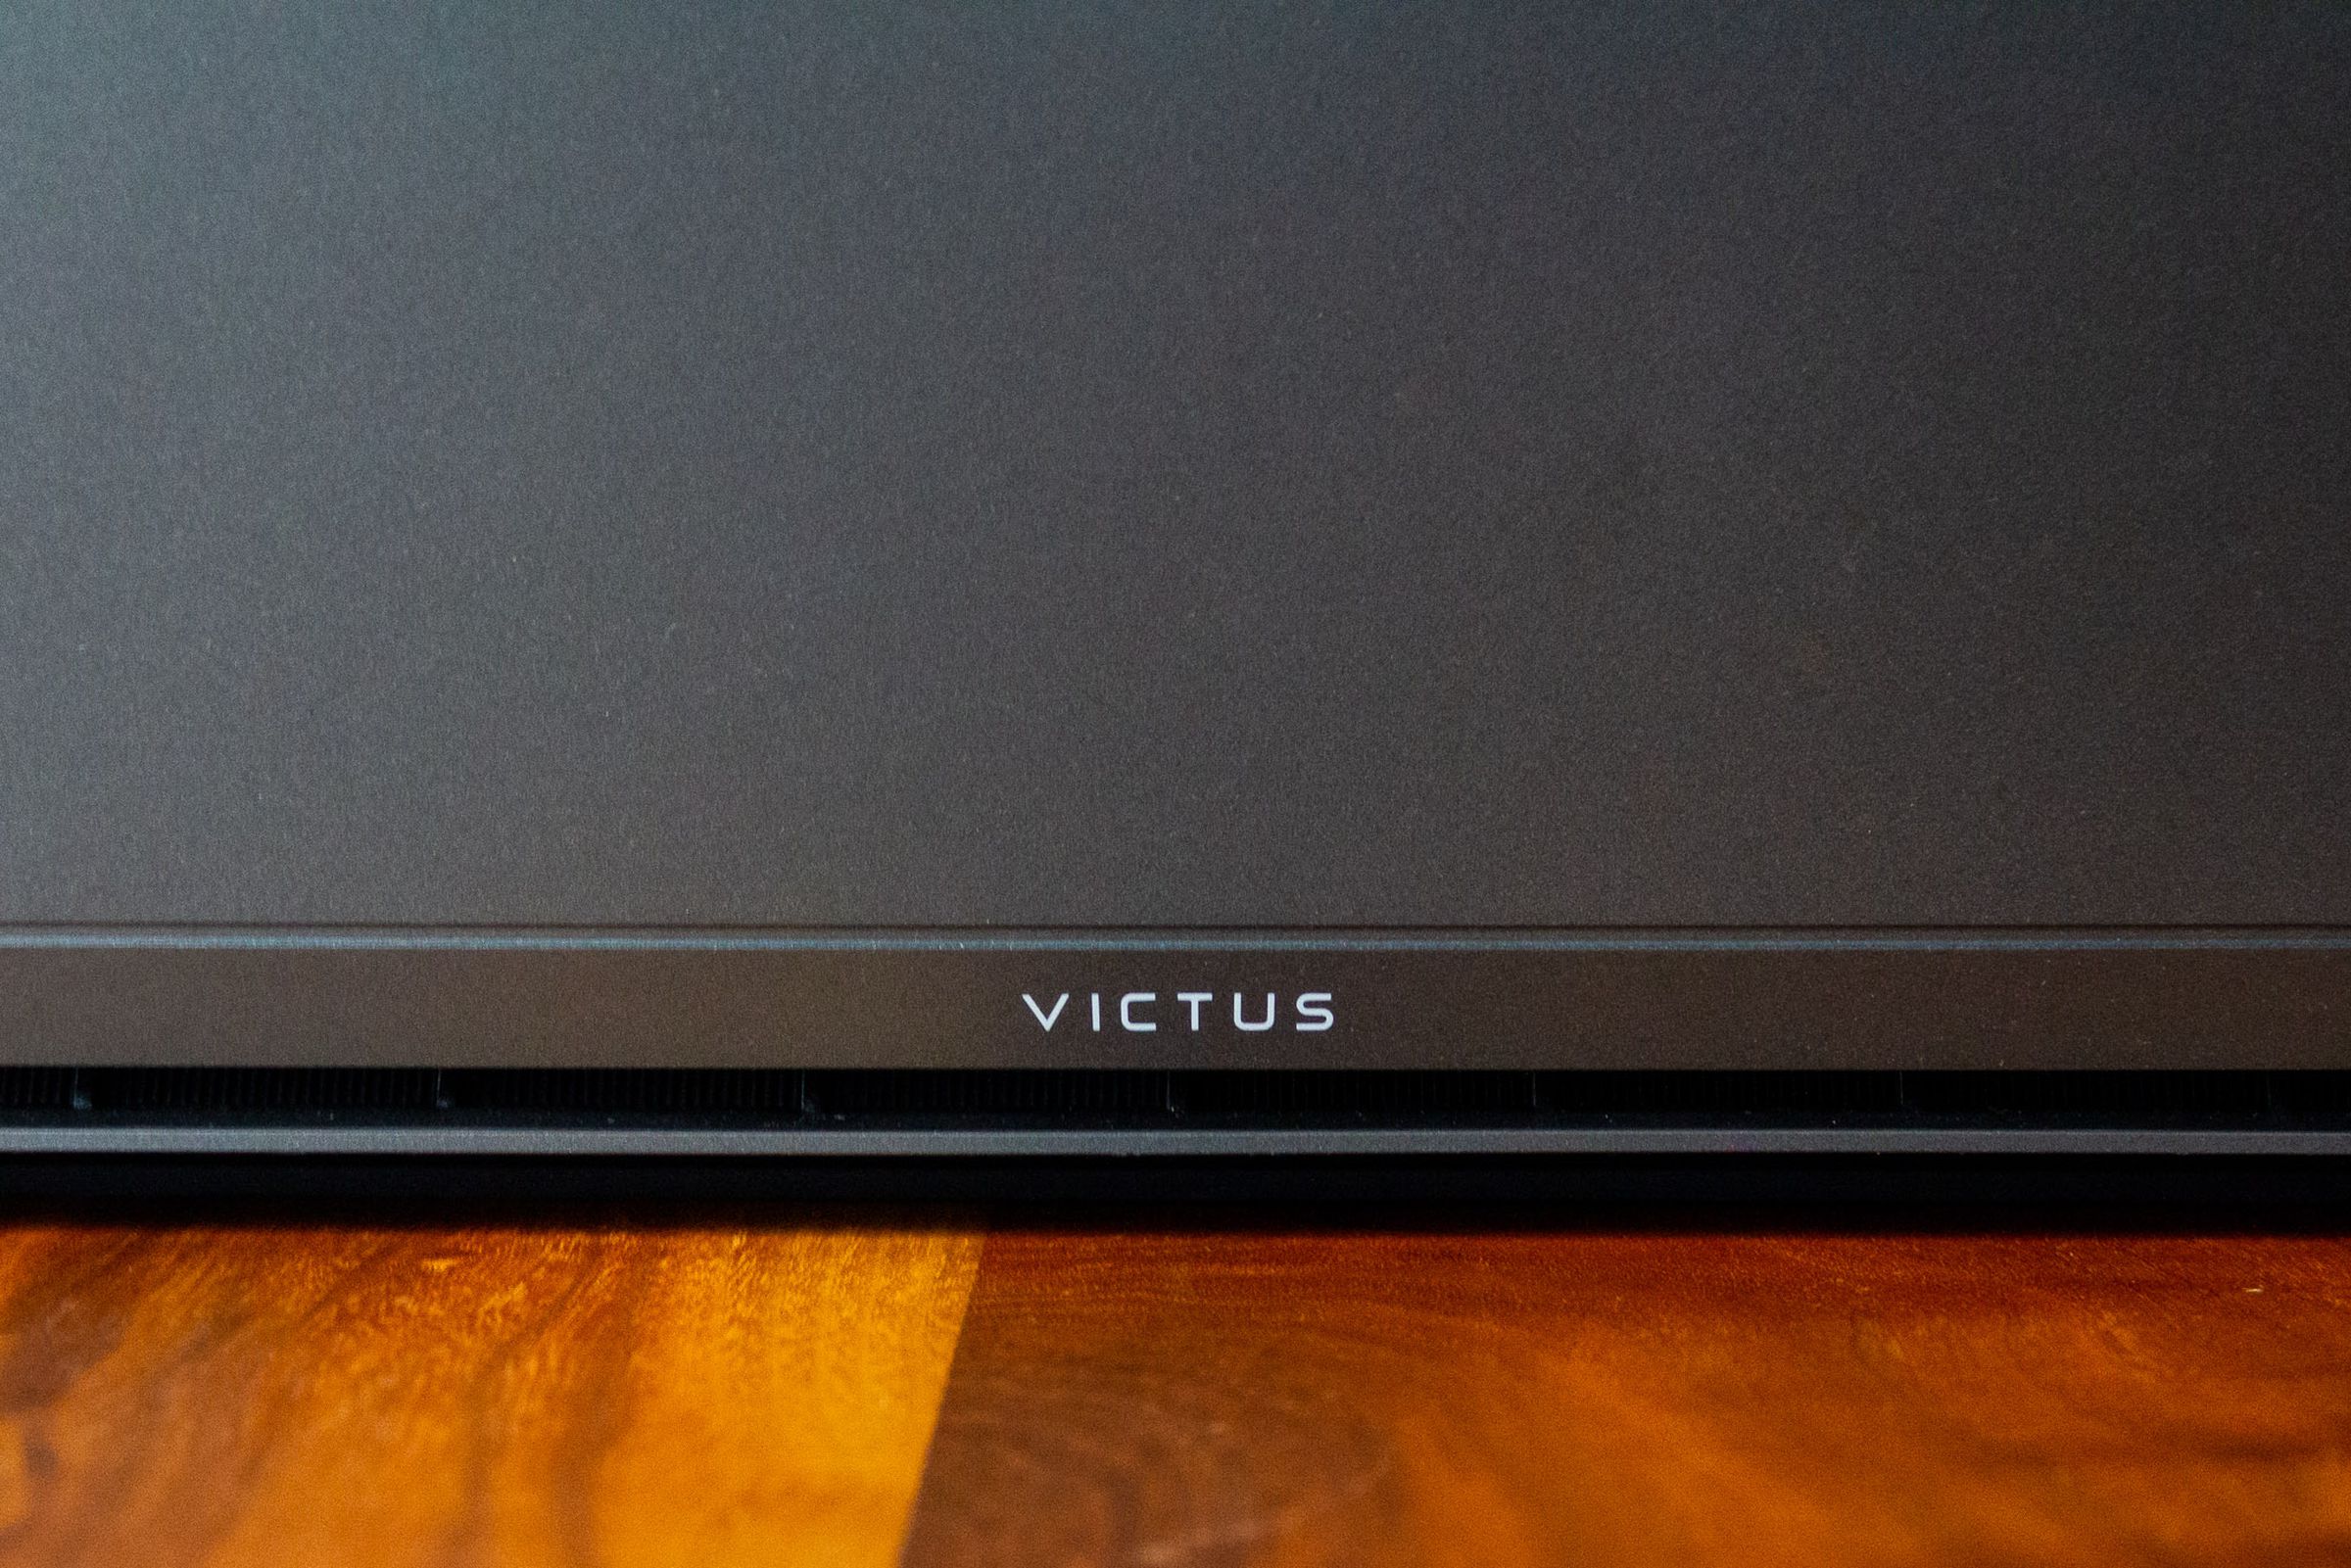 HP Victus 15 review: an $800 laptop that can game